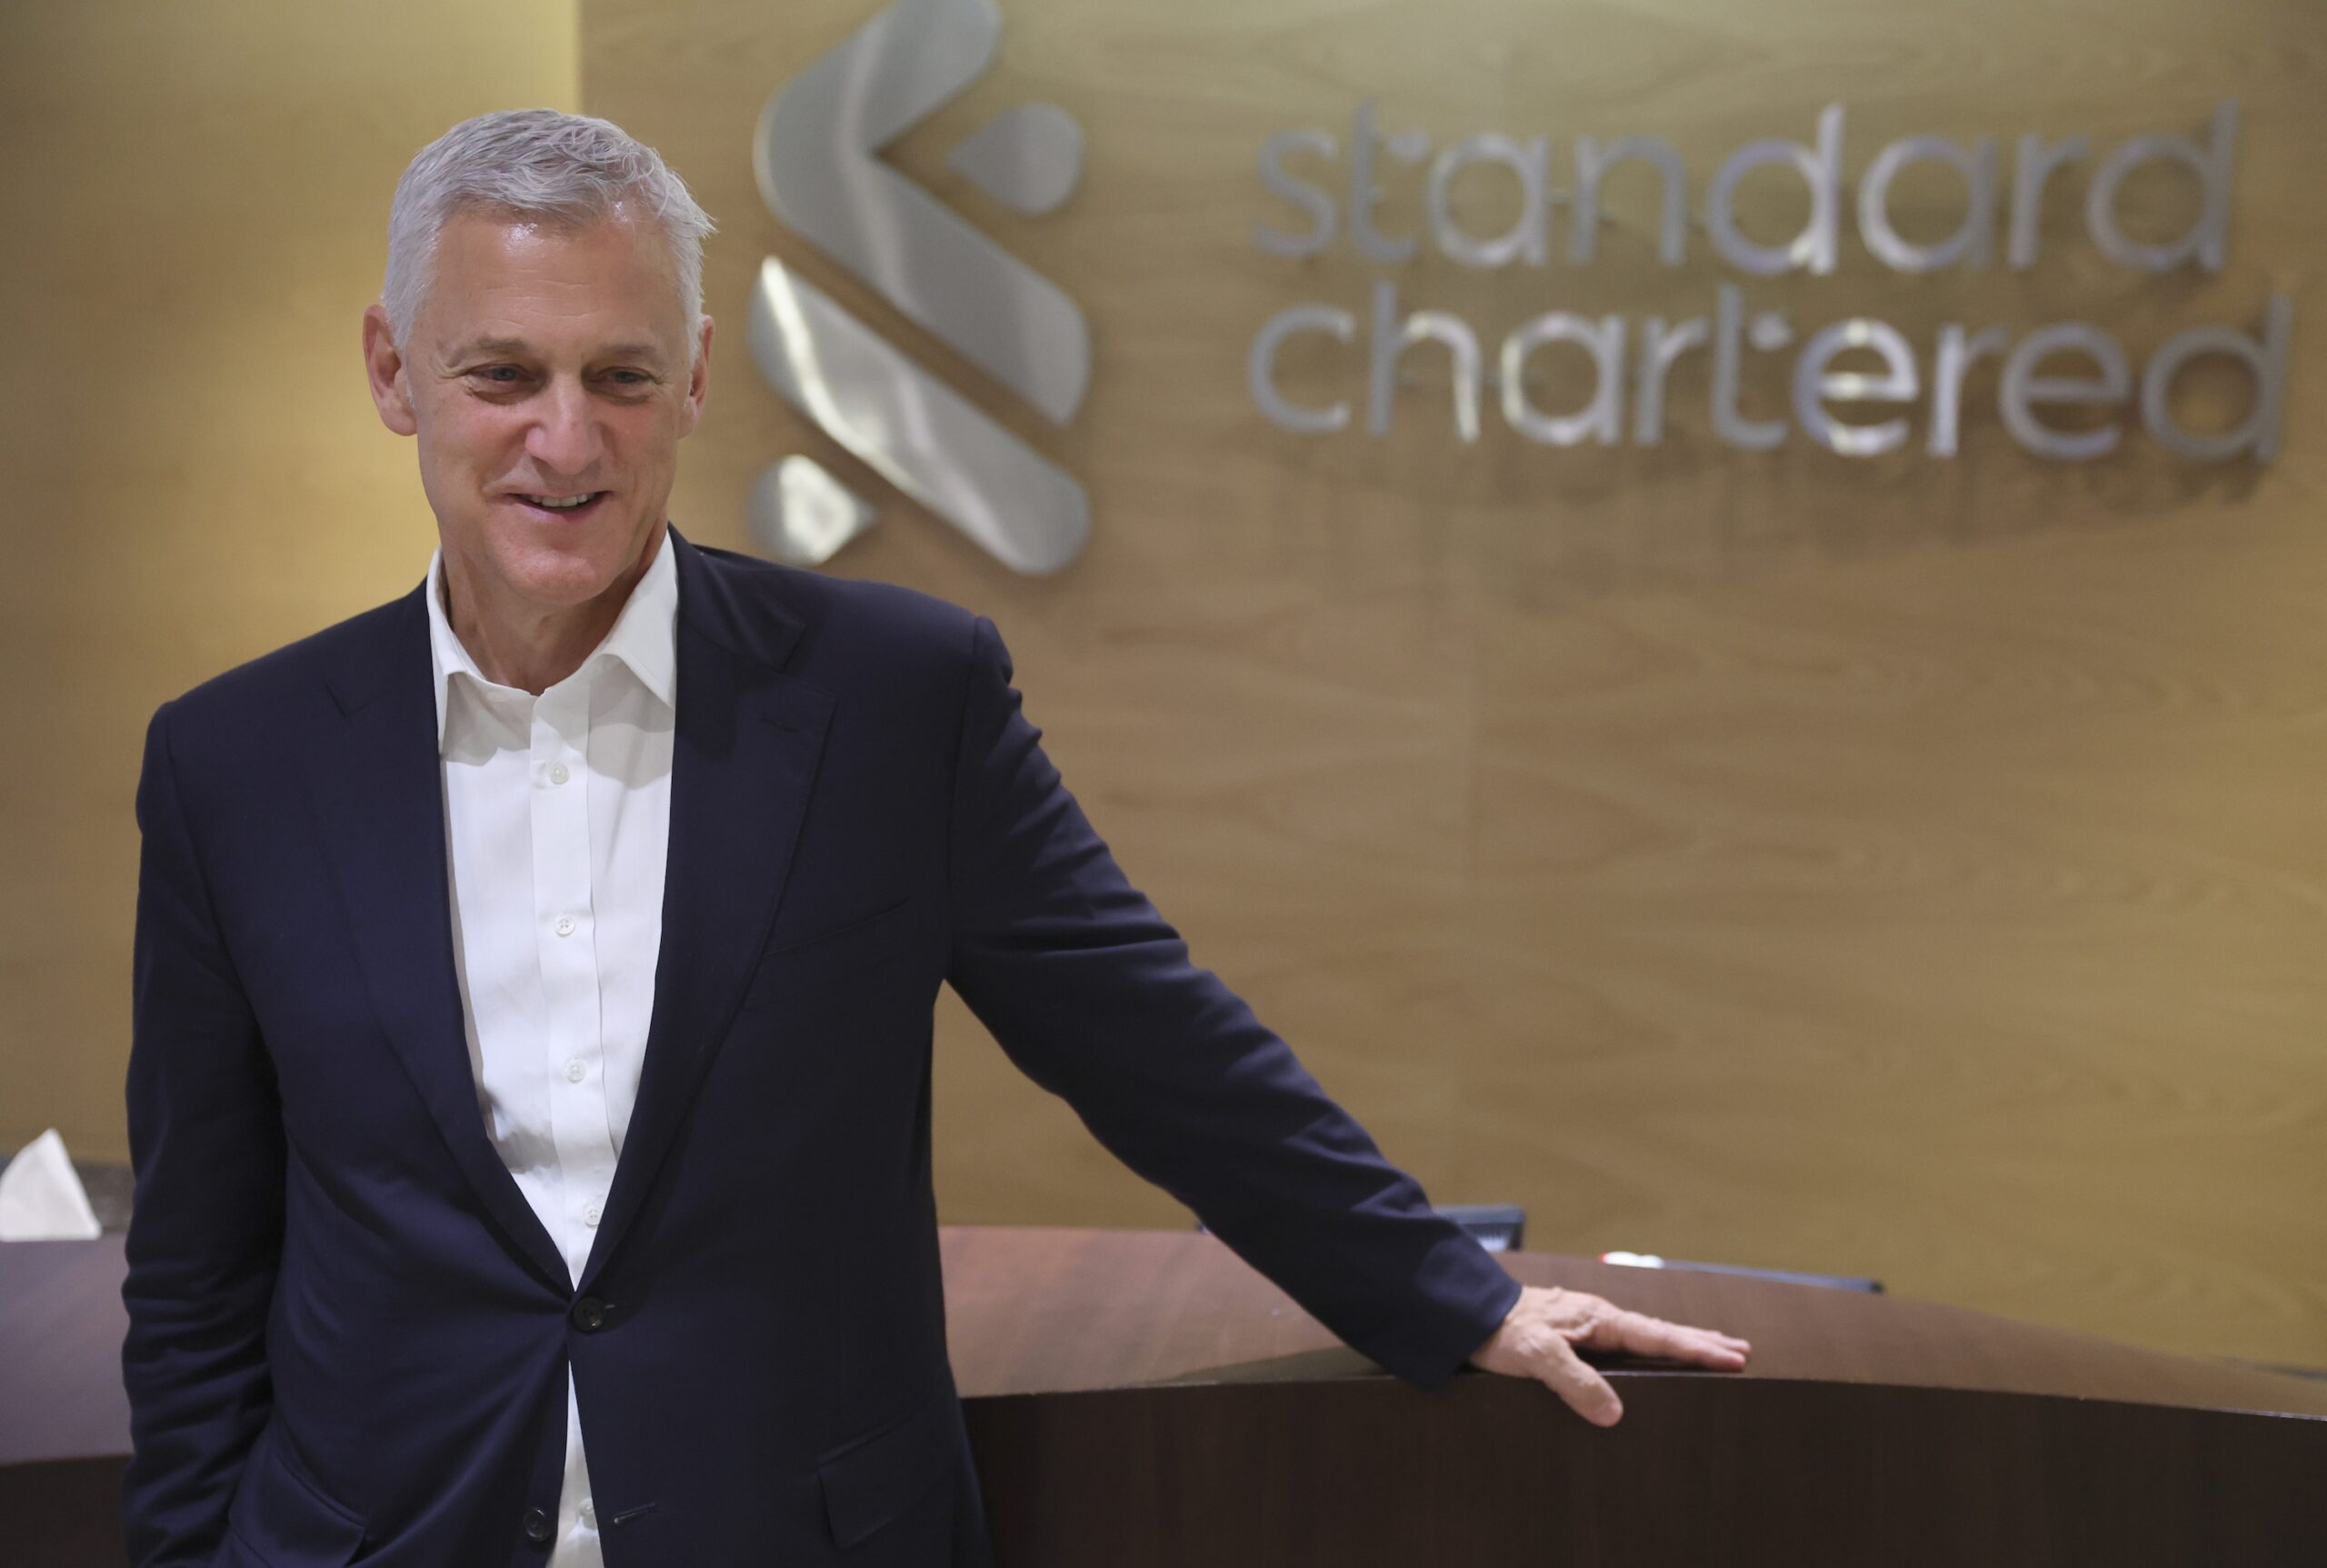 Standard Chartered CEO Bill Winters 'has no reason to believe' FAB will make a bid to buy the British bank